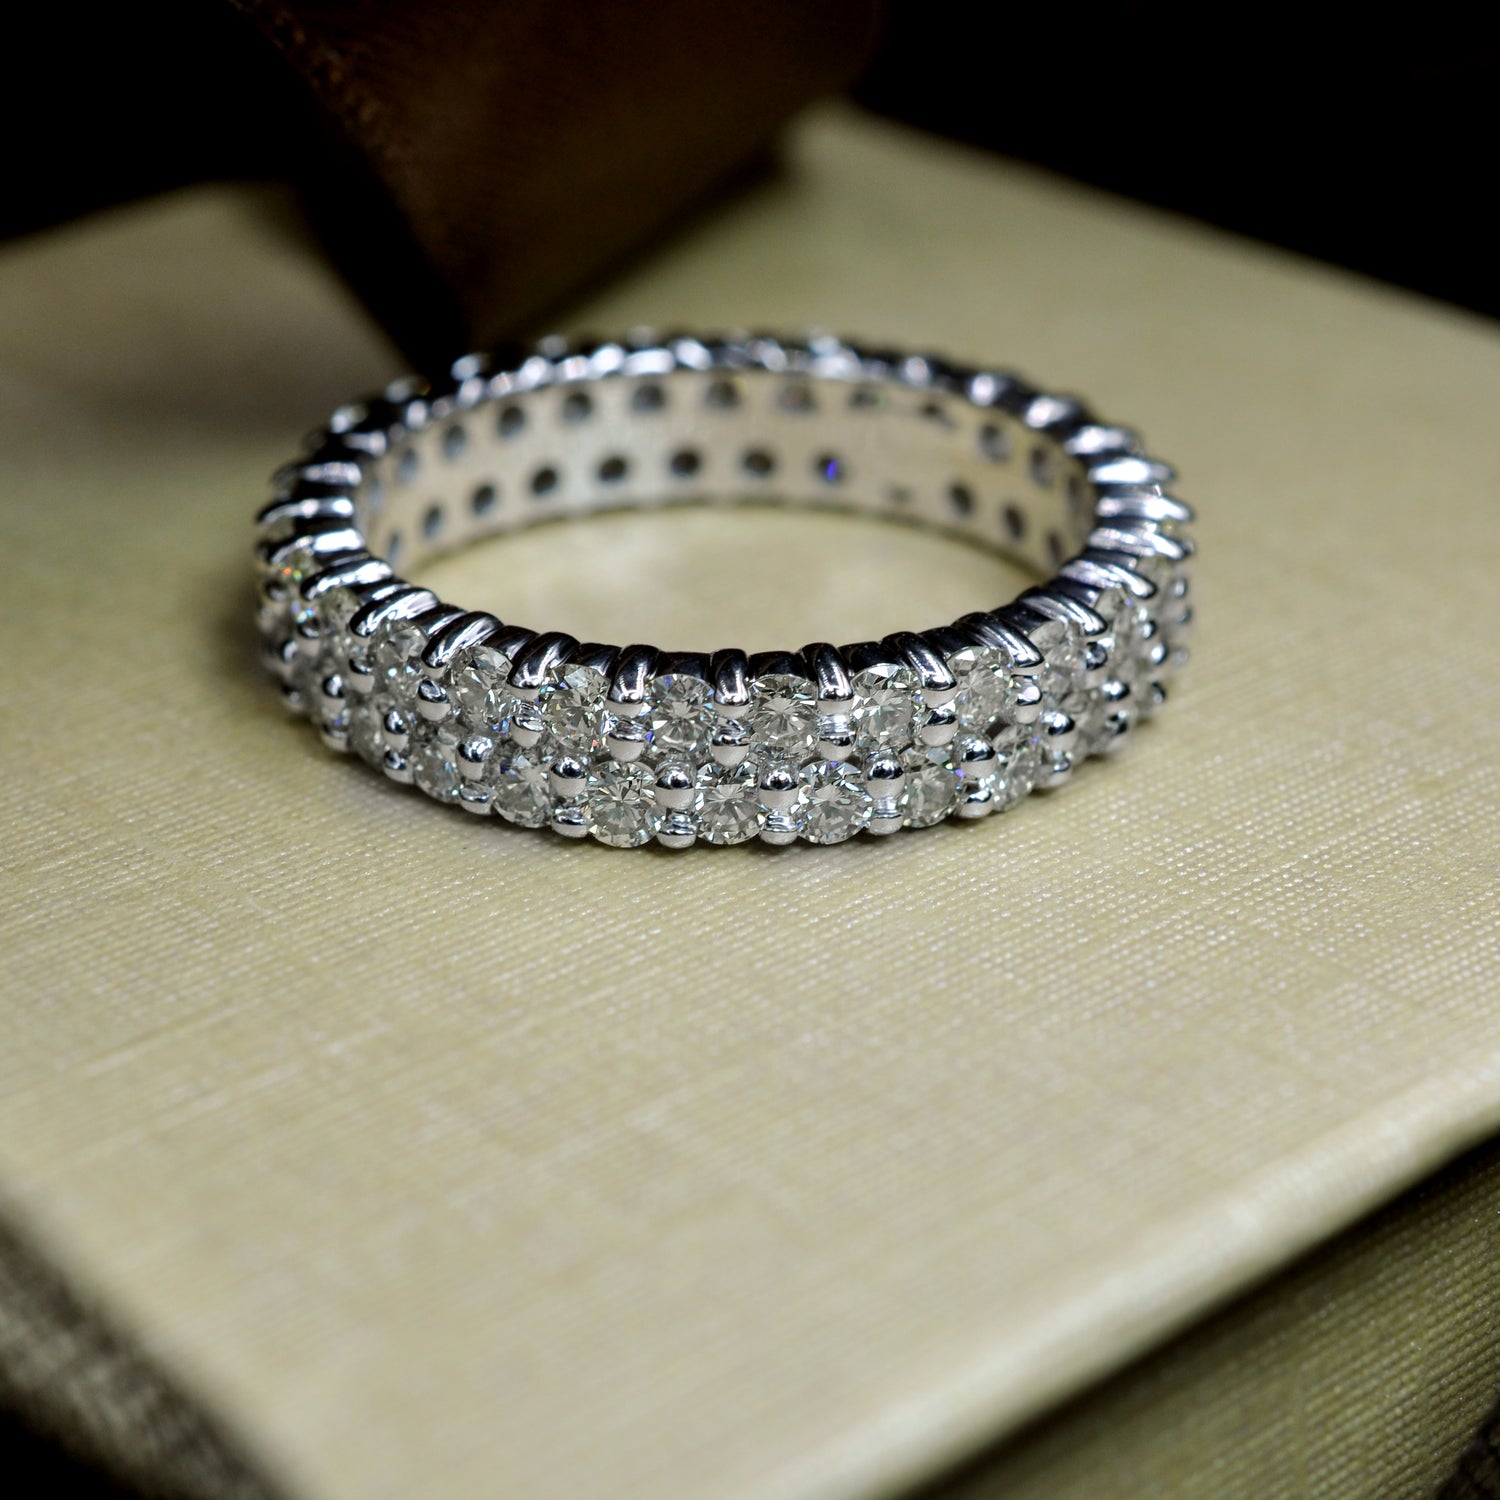 Chic 5.00 CT Round Cut Diamond Eternity Ring in 14KT White Gold